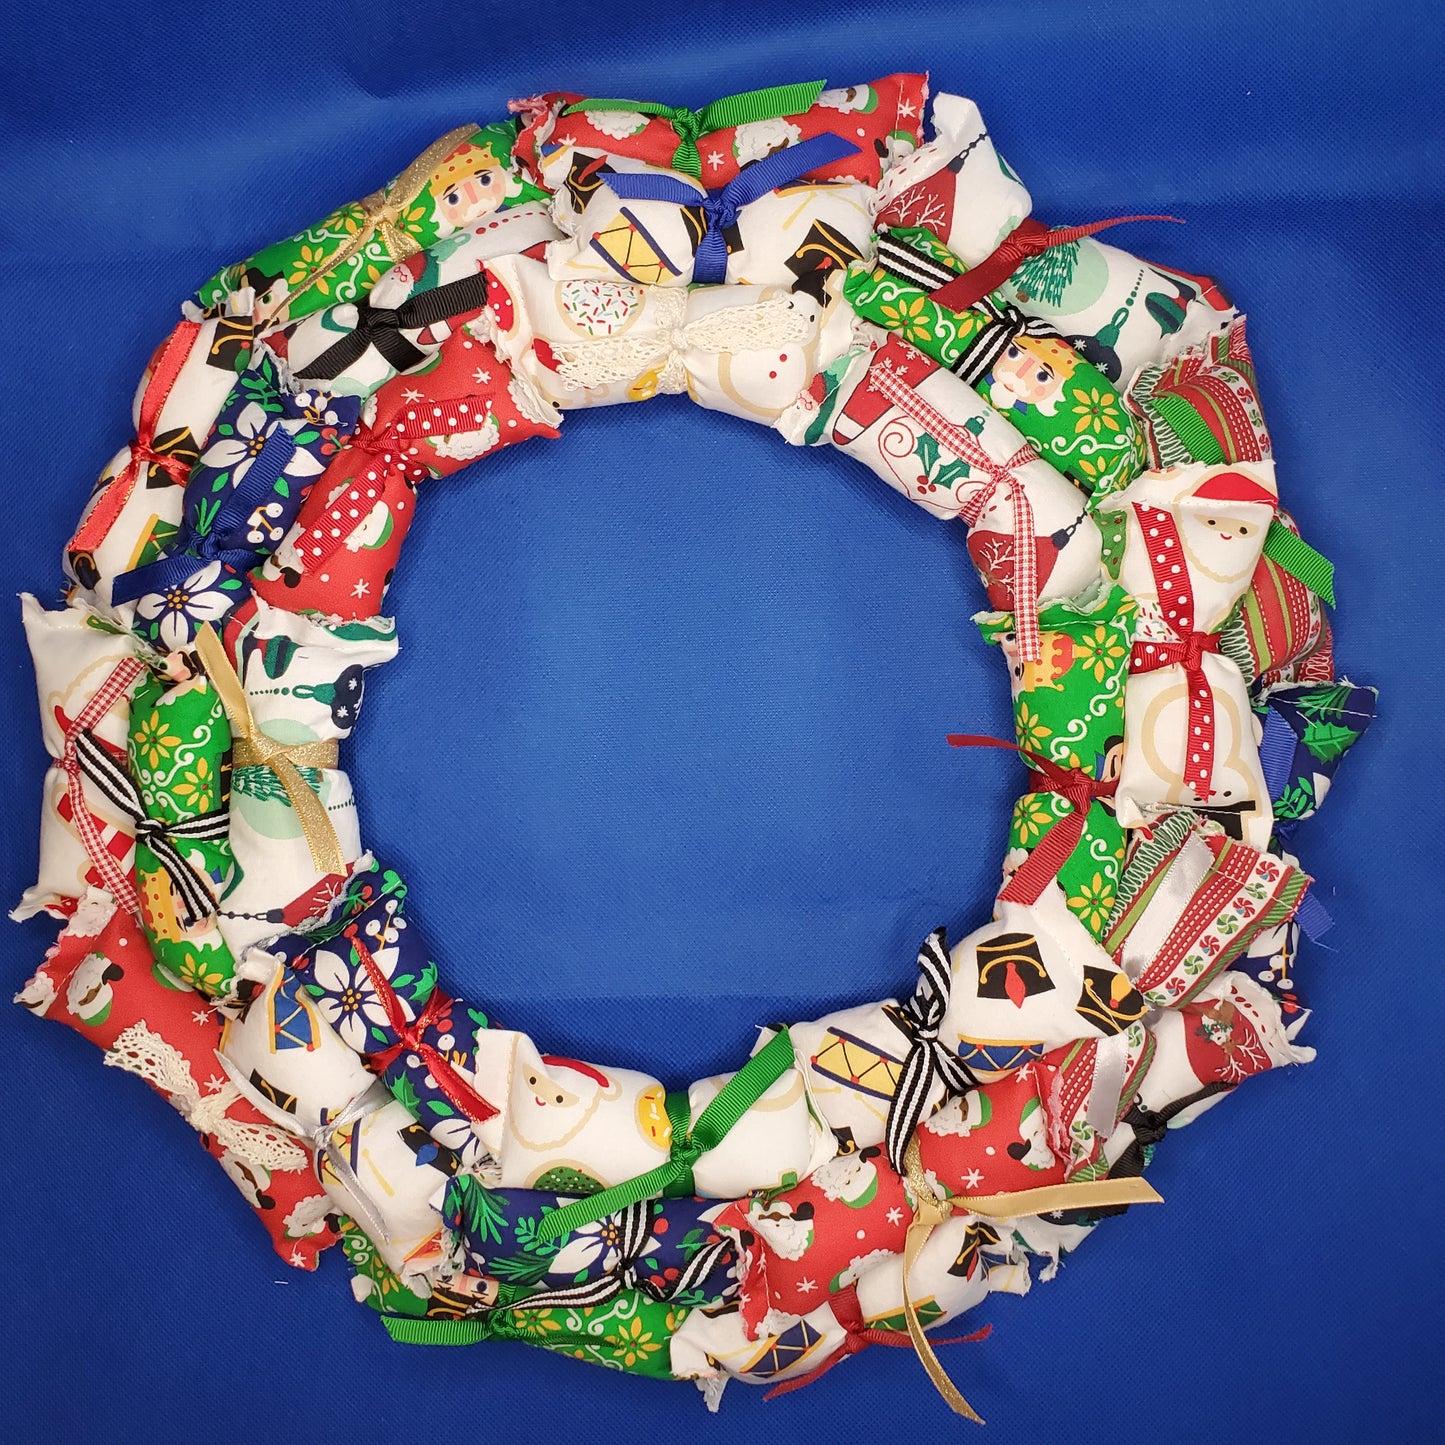 Holiday Wreaths / Home Decor - Several Options Available